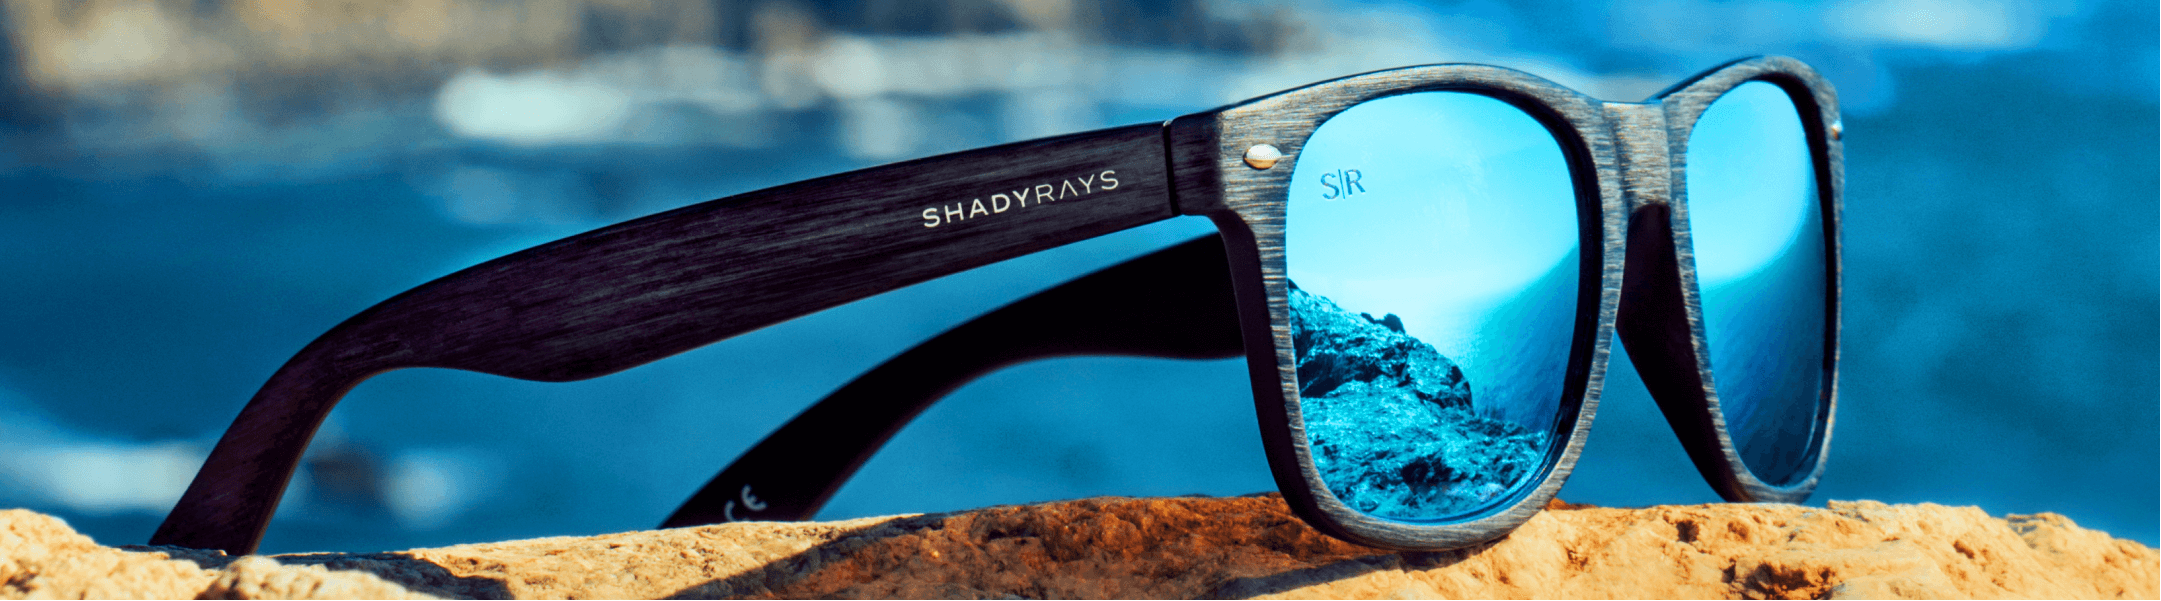 What Is UV 400 Protection On Sunglasses? | SmartBuyGlasses US